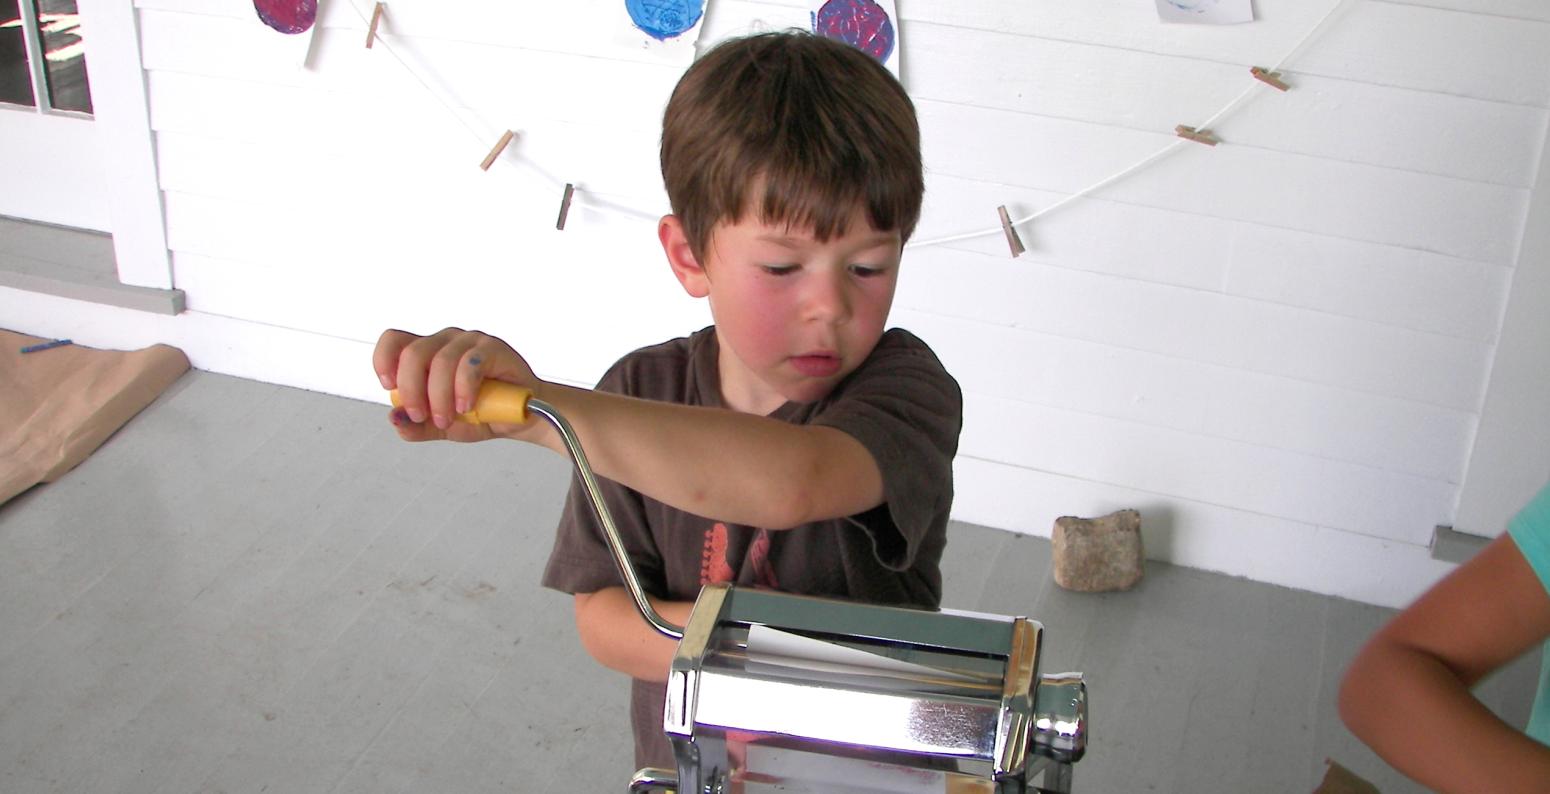 A young boy cranks a pasta machine, using it as a printmaking tool to make a print.